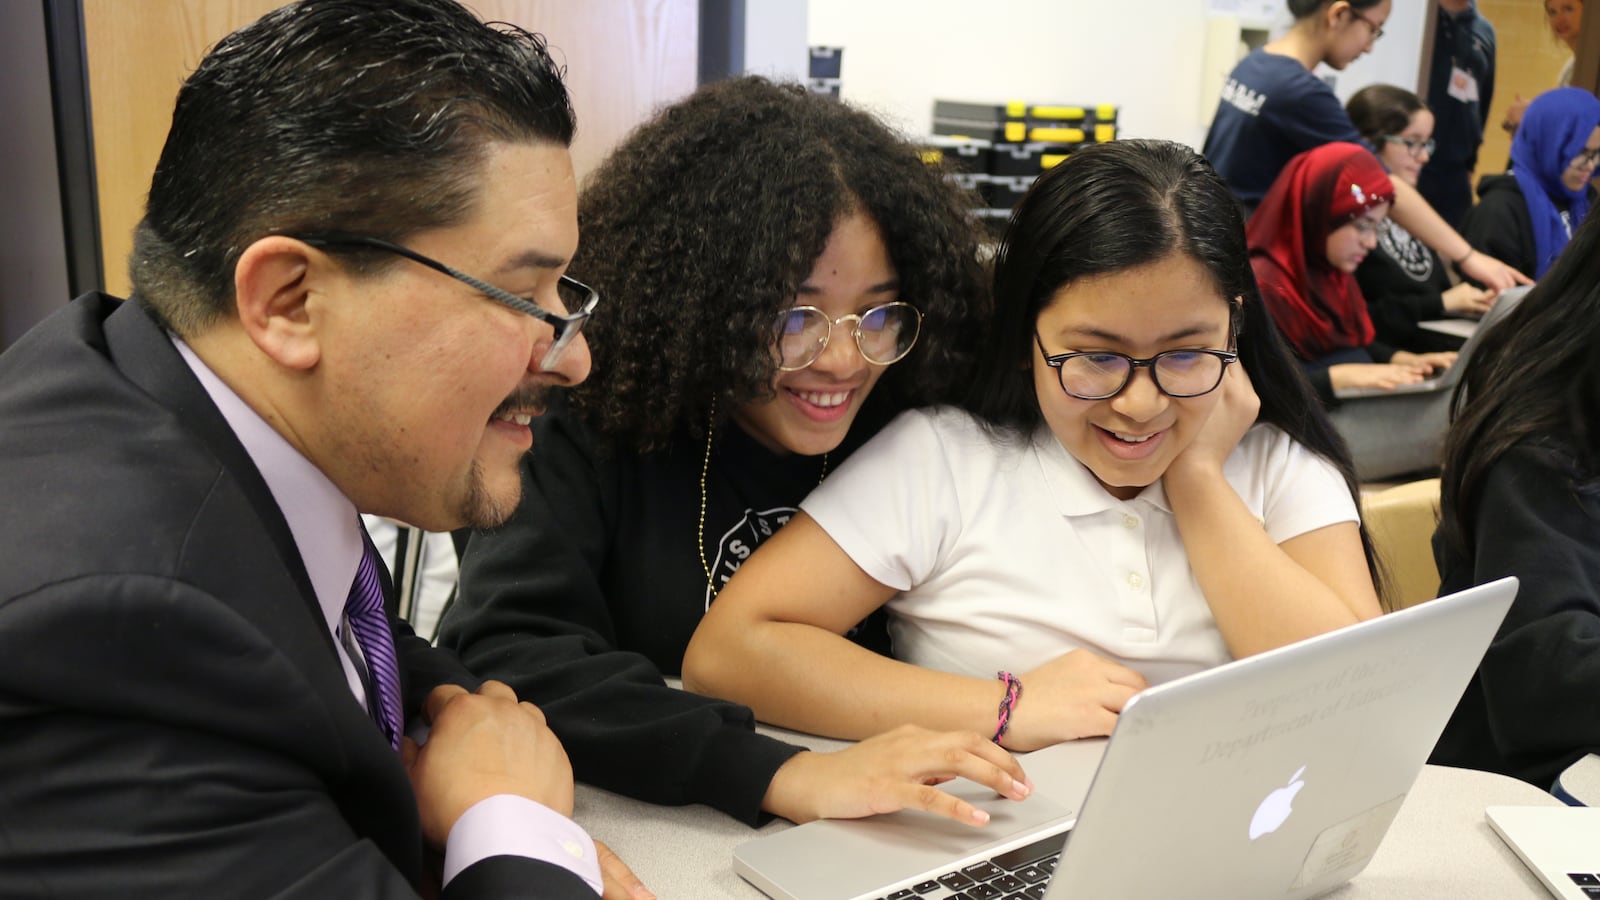 Seventh-grade students at Young Women’s Leadership School in Queens teach Chancellor Richard Carranza how to code using the Scratch programming language.